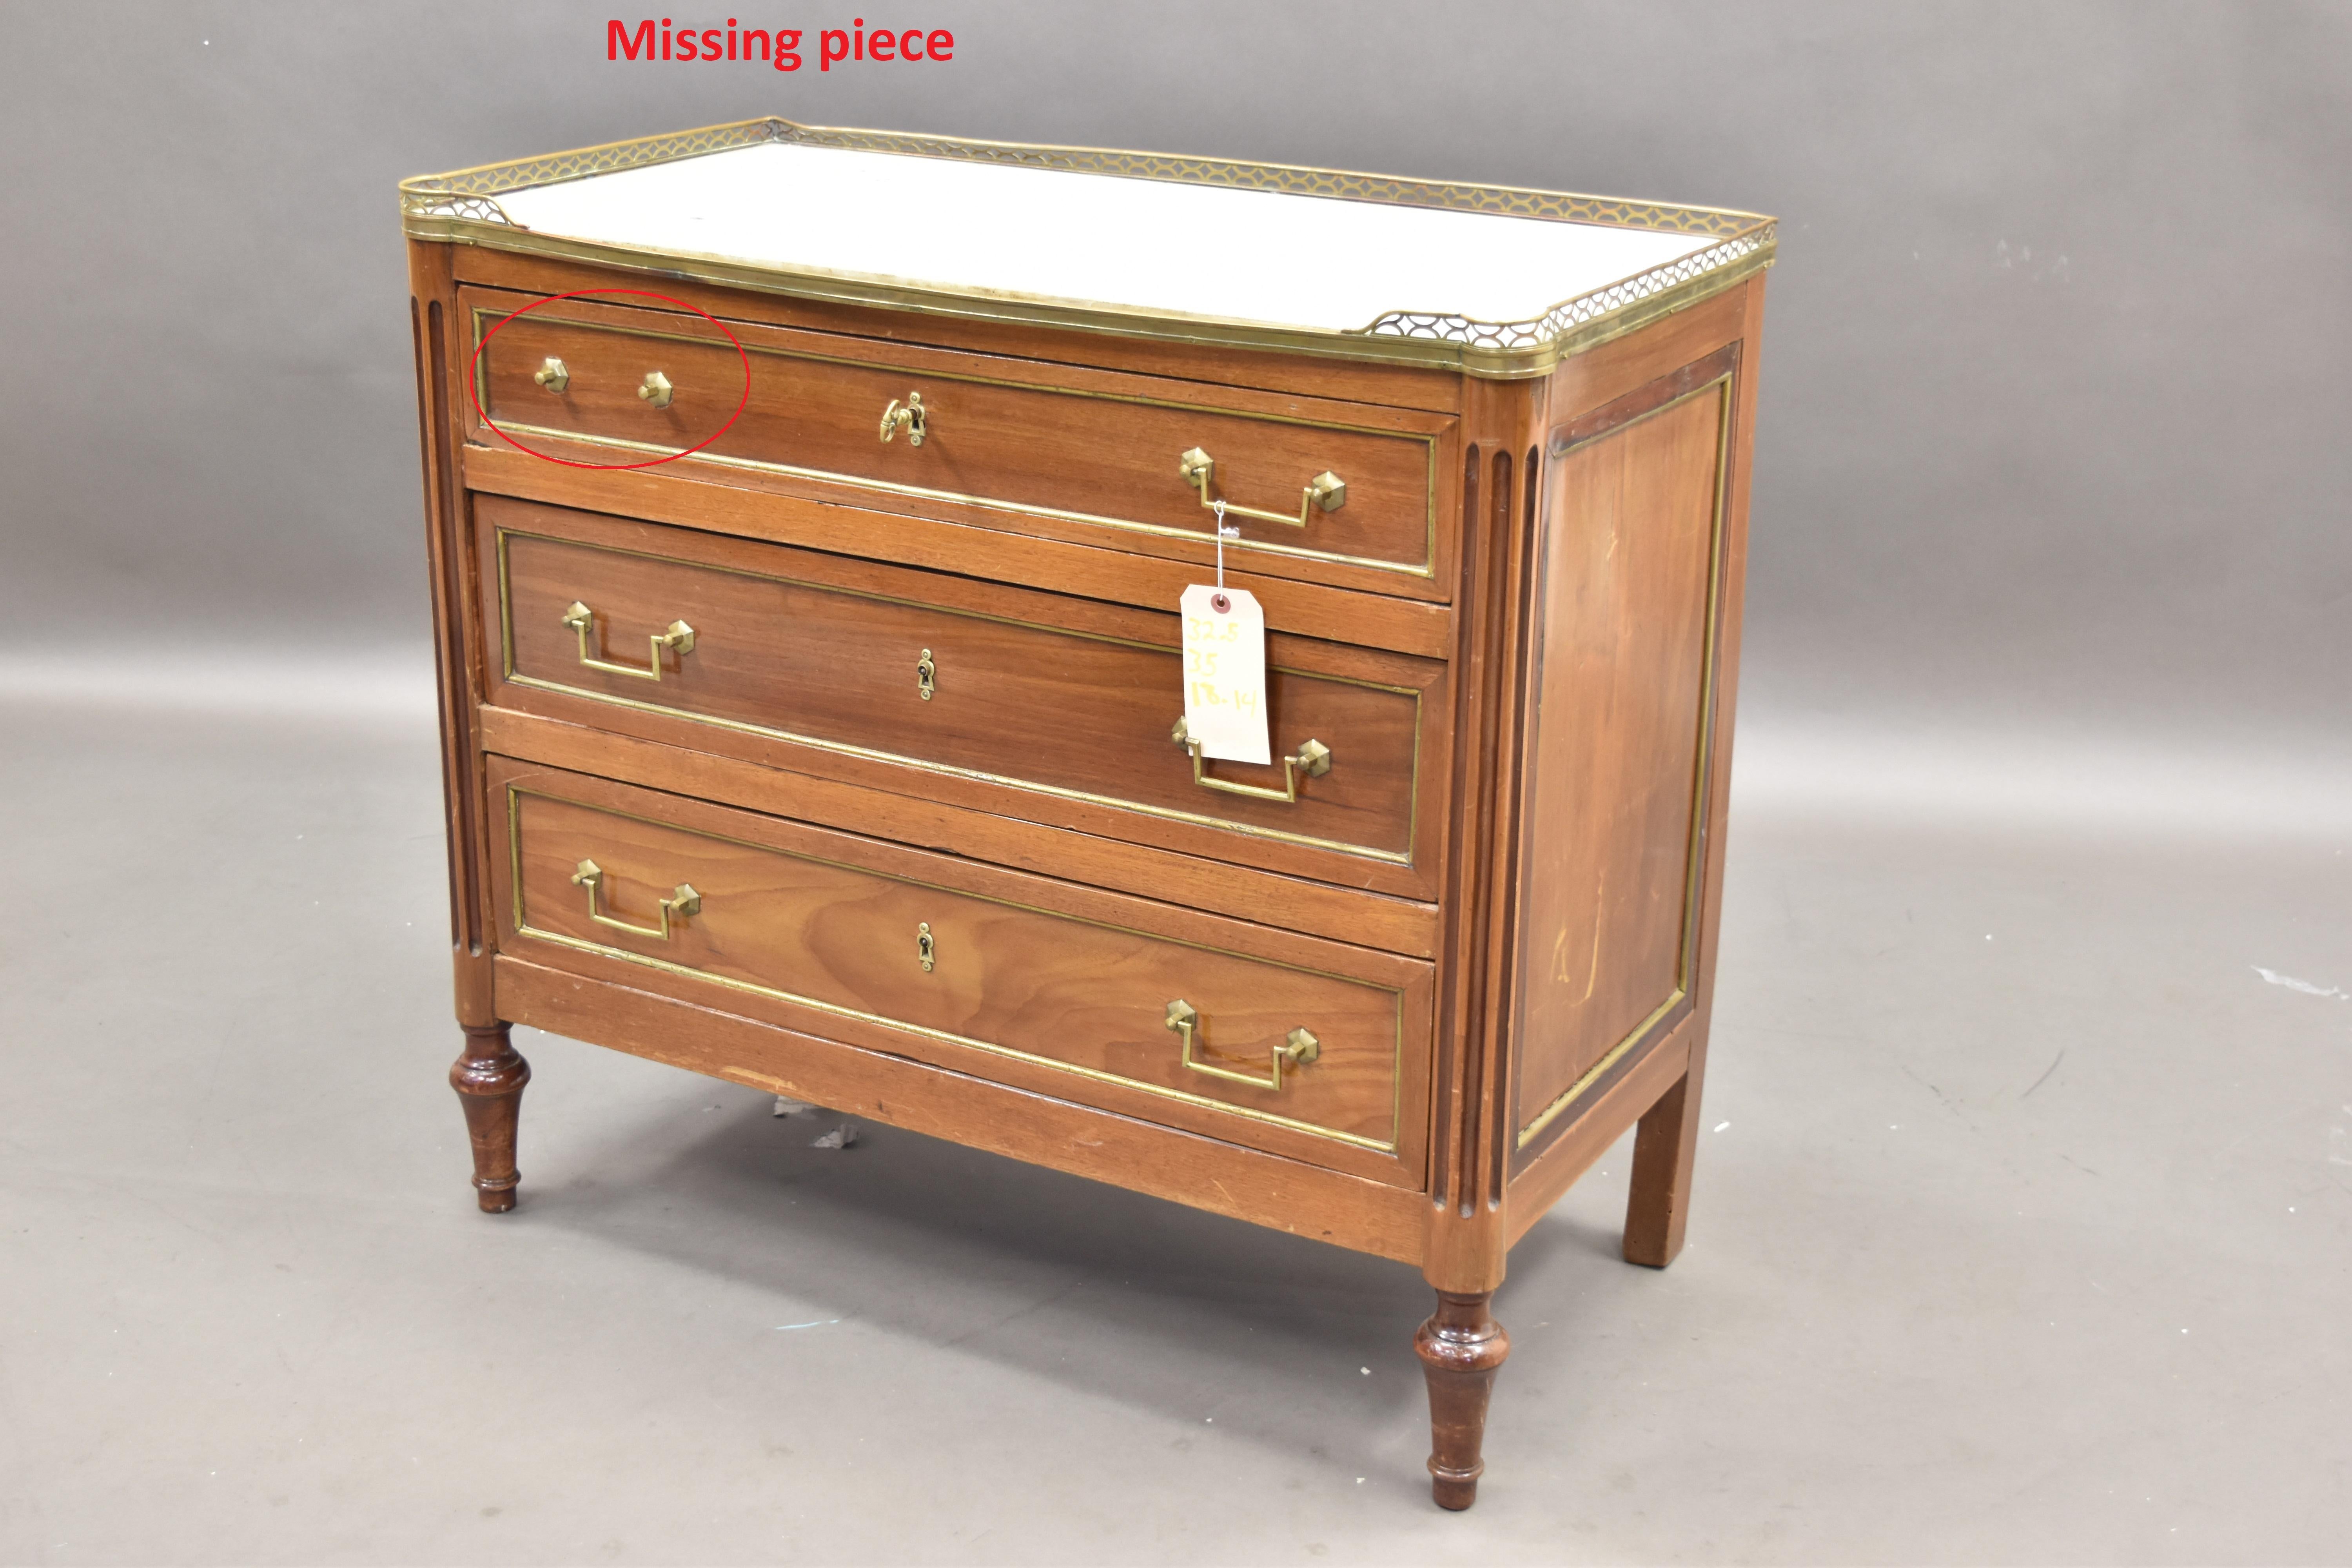 Incredible Louis XVI-style Chest in beautiful, solid Mahogany. This extraordinary piece features a marble top with a finely detailed open weave brass surround. The chest features (3) drawers with brass u-shaped hardware pulls and hexagonal